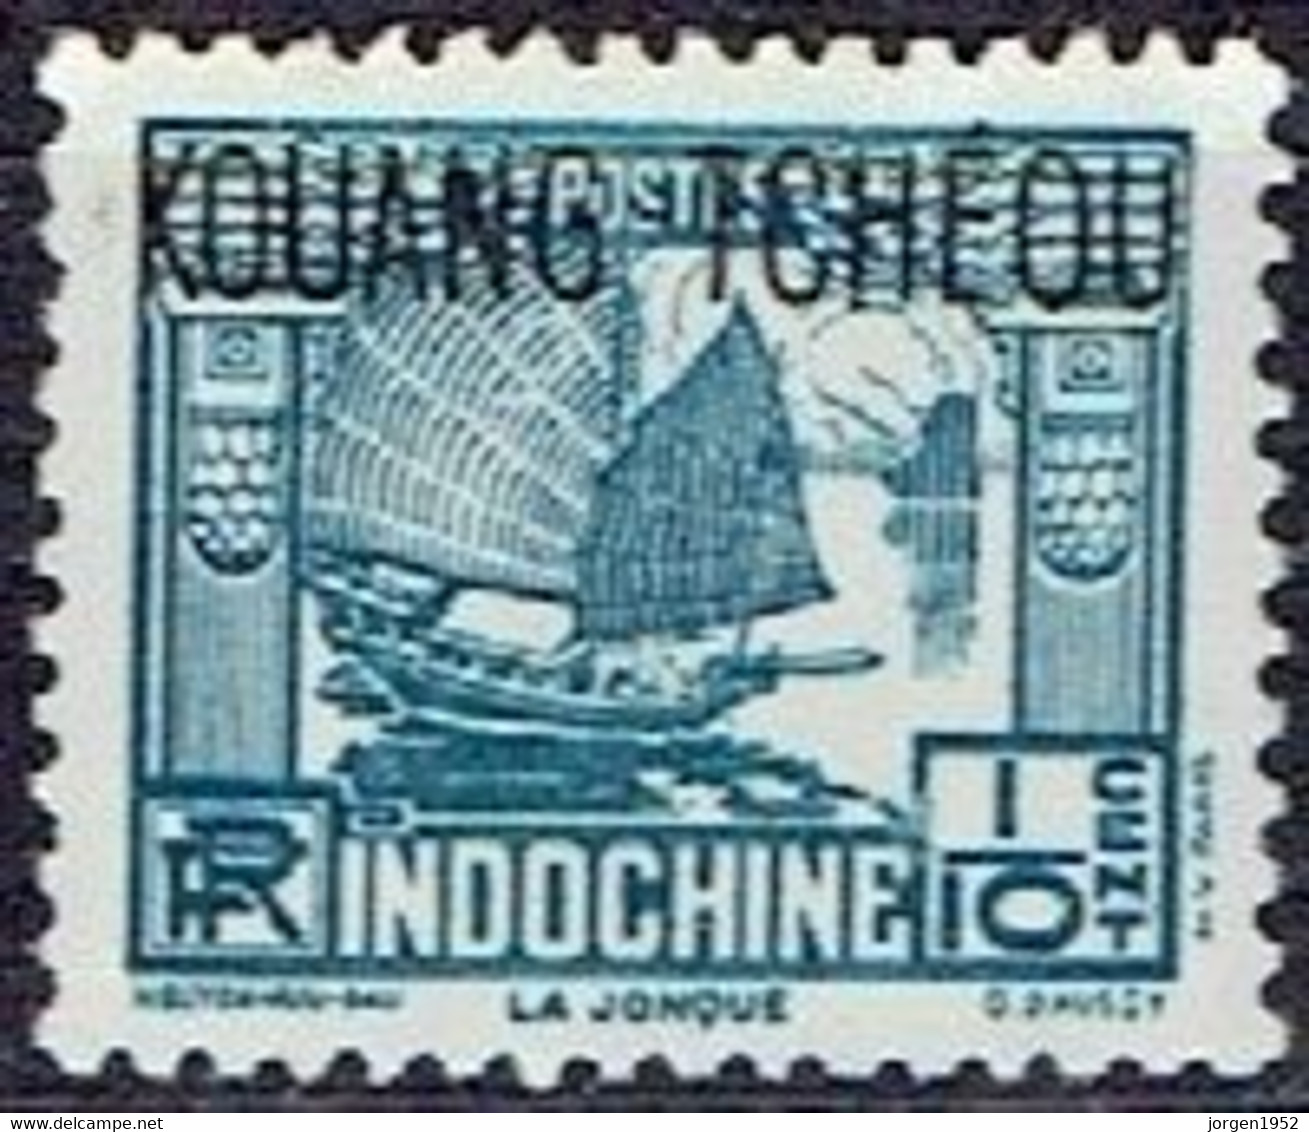 FRANCE   # KOUANG-TCHEOU FROM 1937  STAMPWORLD 97** - Unused Stamps